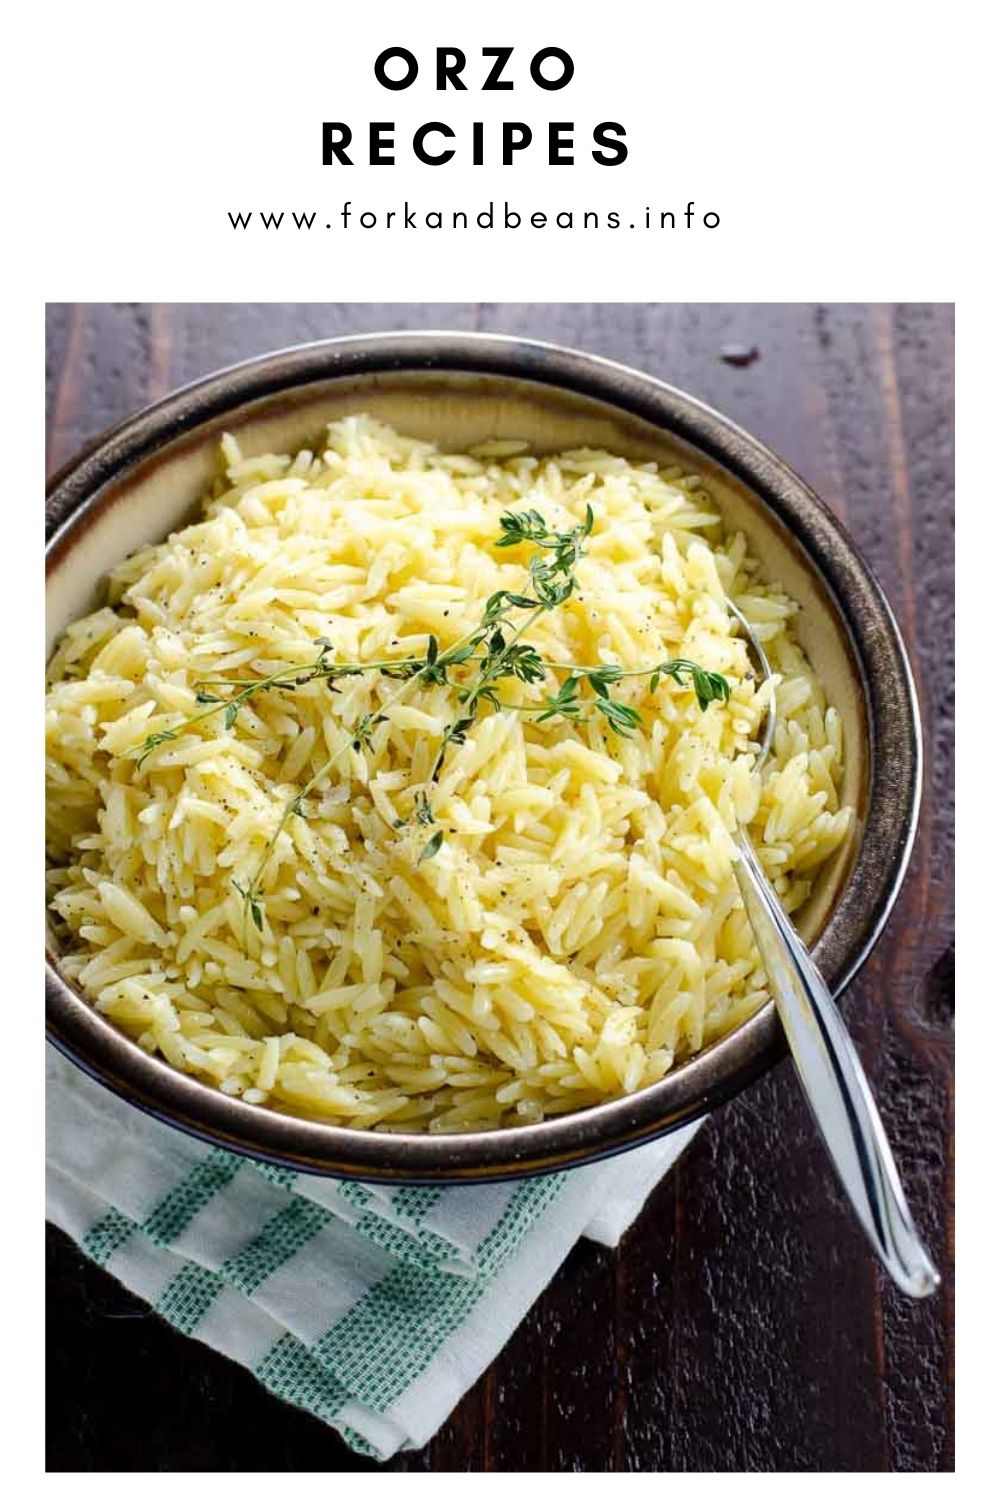 Our Favorite Easy Orzo Recipe